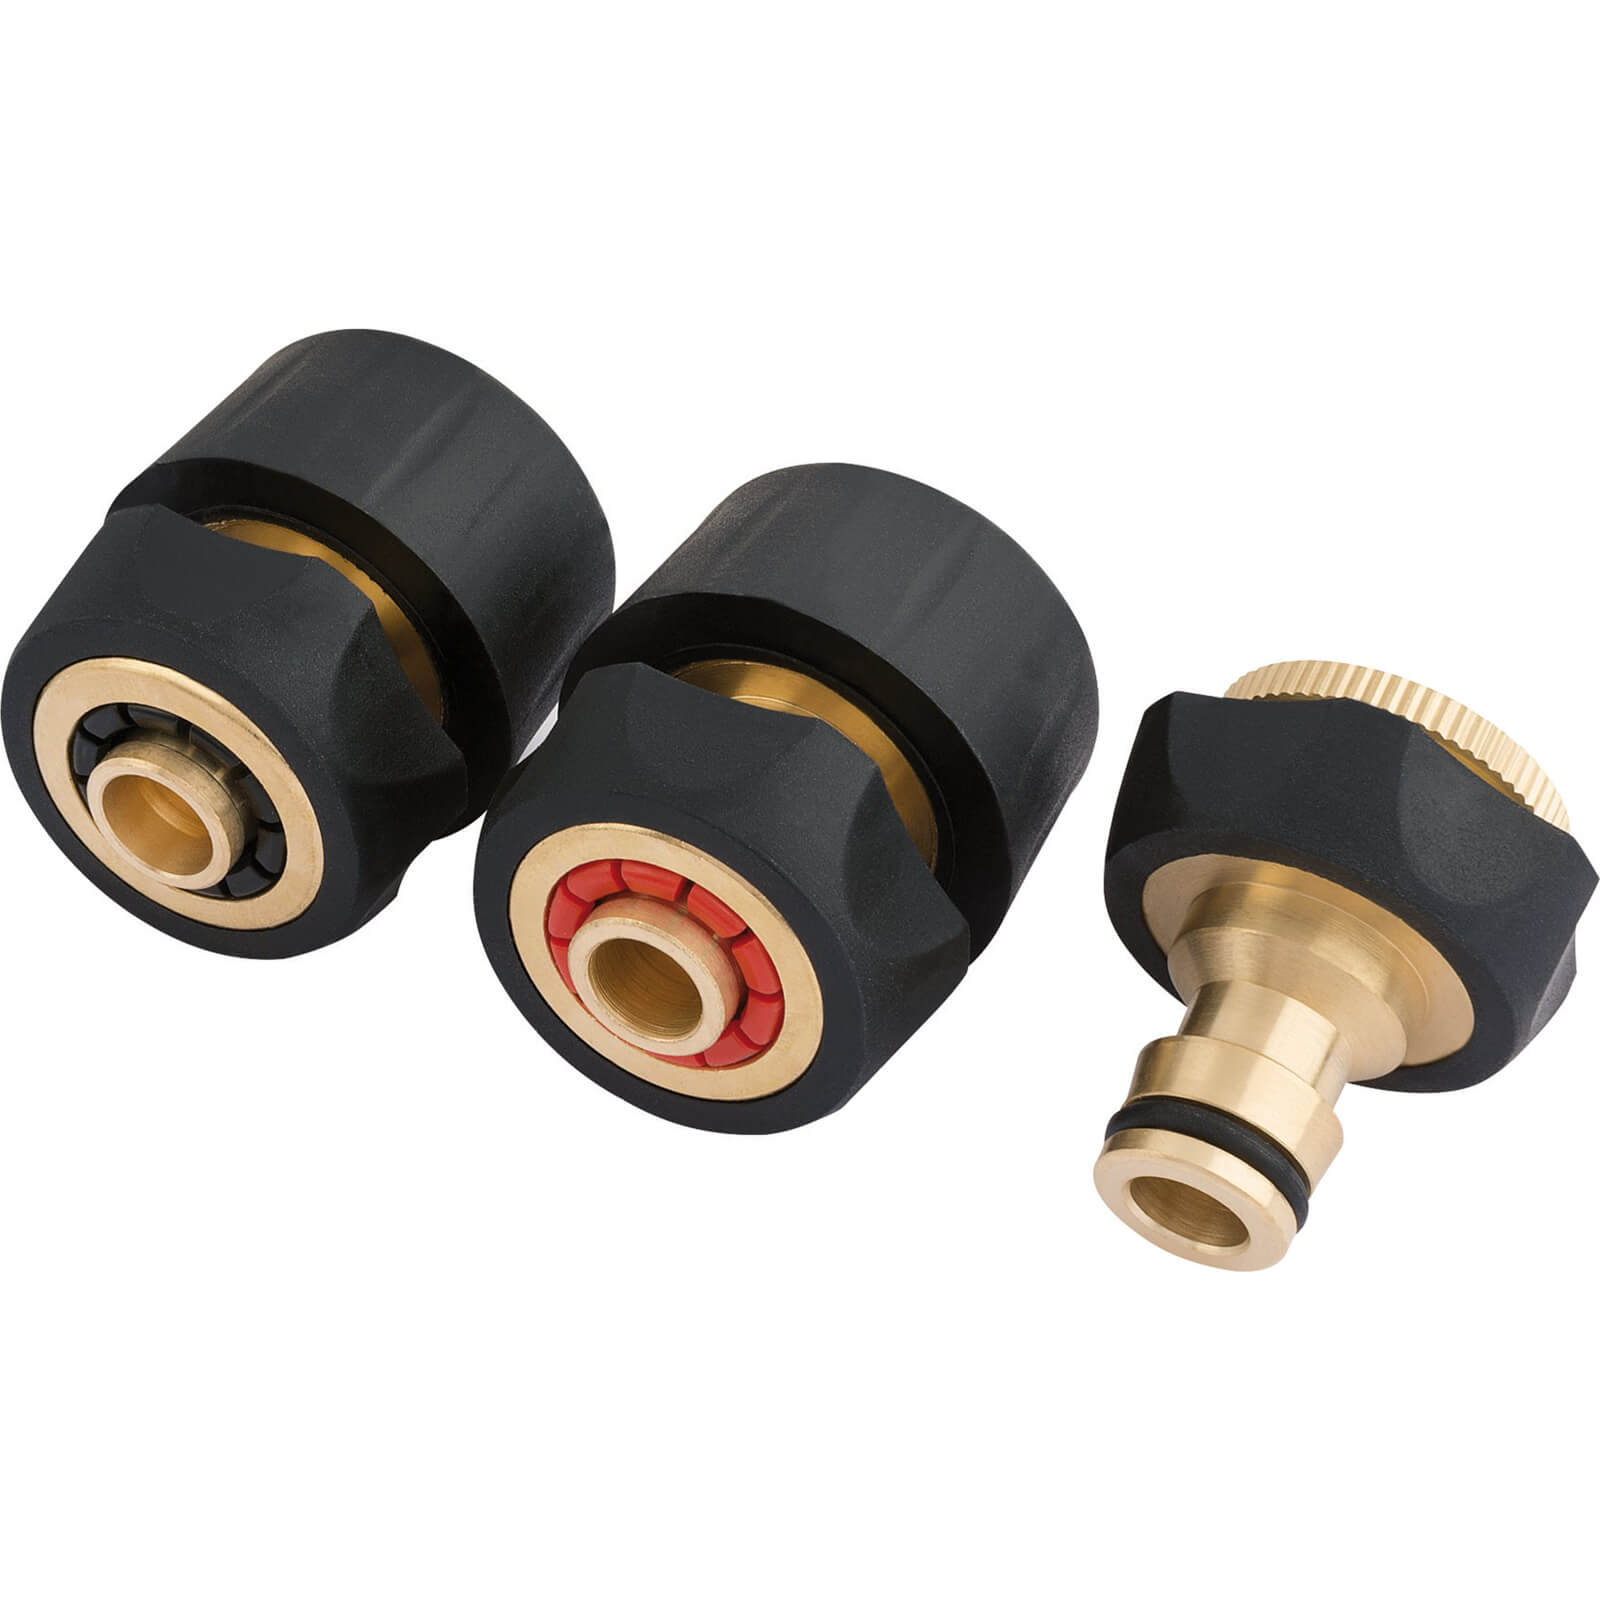 Image of Draper 3 Piece Brass and Rubber Hose Connector Set